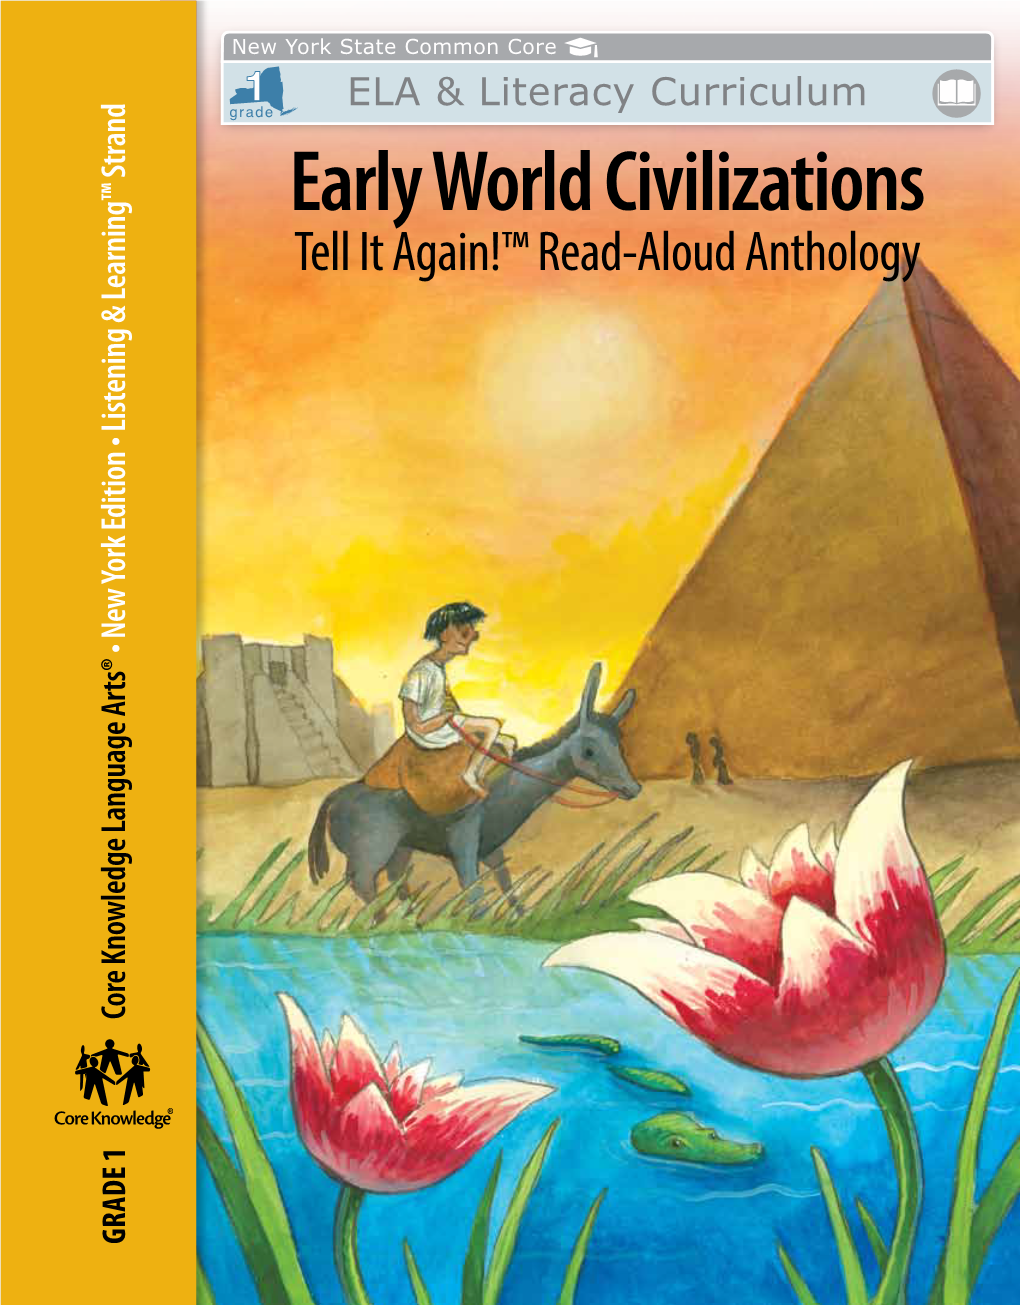 Early World Civilizations